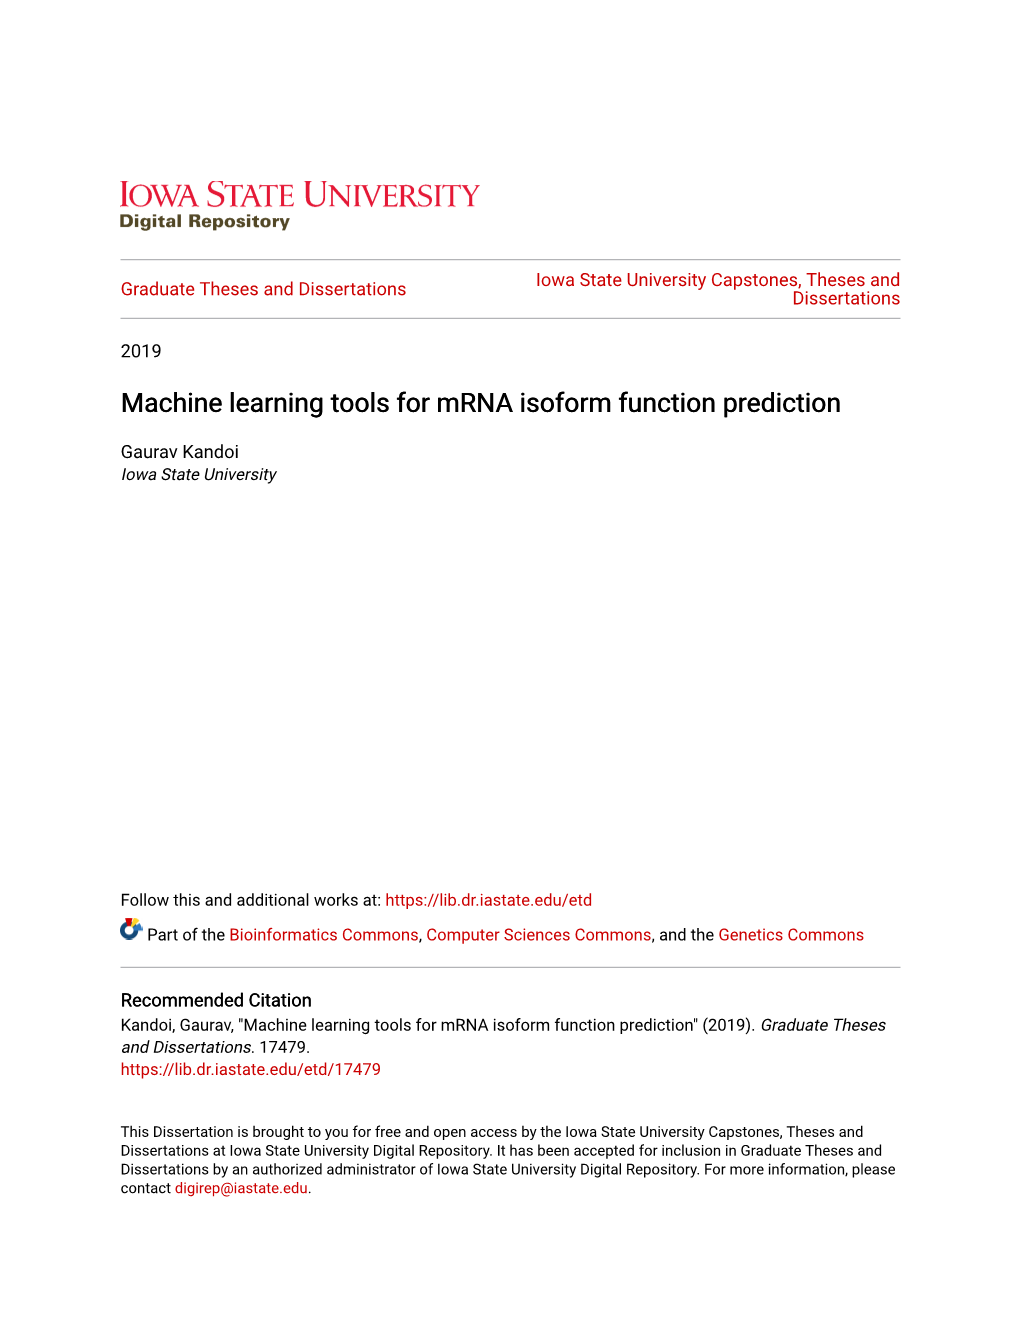 Machine Learning Tools for Mrna Isoform Function Prediction